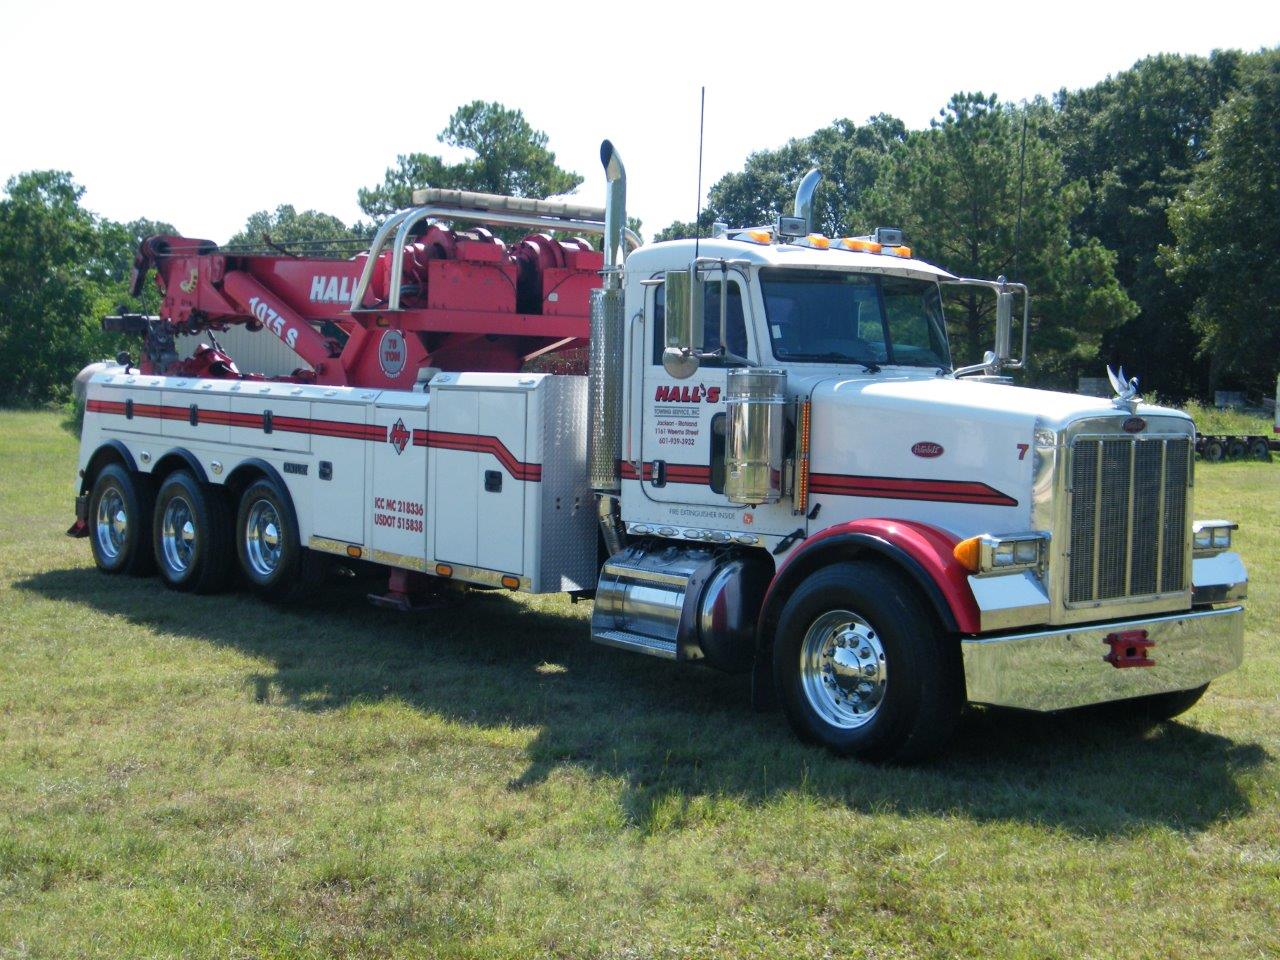 Hall’s Towing Service is a full service 24/7 towing company in Jackson, MS committed to providing the most comprehensive services for all your towing and recovery needs. Its starts with an experienced and friendly staff of customer representative.

Because many of our service calls occur during the most stressful situation, our team can quickly dispatch a vehicle to arrive at the scene. They can also take the time to address any of your questions or concerns about our towing and recovery services.

The team at Hall’s Towing Service understands that time is of the essence. Each job is handled with high priority to ensure our customers can get back on the road or can be directed to the nearest vehicle repair facility.

We Tow Any Vehicle - Anywhere

Nobody likes to hear the word “no”. Here at Hall’s Towing Service, our team goes the extra mile to meet all of your towing needs. Whether it’s heavy-duty towing in Jackson or long distance towing, there are no limits on our towing and recovery services.

We take pride in our attention to detail. This means moving vehicles as quickly and safely as possible. We have a complete fleet of trucks capable of moving vehicles regardless of size. When it comes time for an emergency job, you only want a towing service with a proven track record of looking out for the best interest of each customer. Turn to our team for the best 24/7 towing and recovery in Mississippi, call Hall’s Towing Service today.

24/7 Emergency Dispatch: (601) 939-3932

To provide the best quality of towing and recovery service in Jackson, it takes a team of dedicated professionals from the management team to customer service along with our skilled drivers and technicians. Our staff is qualified to do any job you might need! Contact us to find out what Hall's can offer you.

What really separates Hall’s Towing Service from the competition is our wide variety of towing services.

Our team can provide the following services:

•	24/7 towing and recovery
•	Long distance towing
•	Light, medium and heavy-duty towing
•	Recovery services
•	Ability to haul heavy equipment from dozers to cranes

 For Towing with no Limits, Call or Click hallstowing.com Today! (601) 939-3932